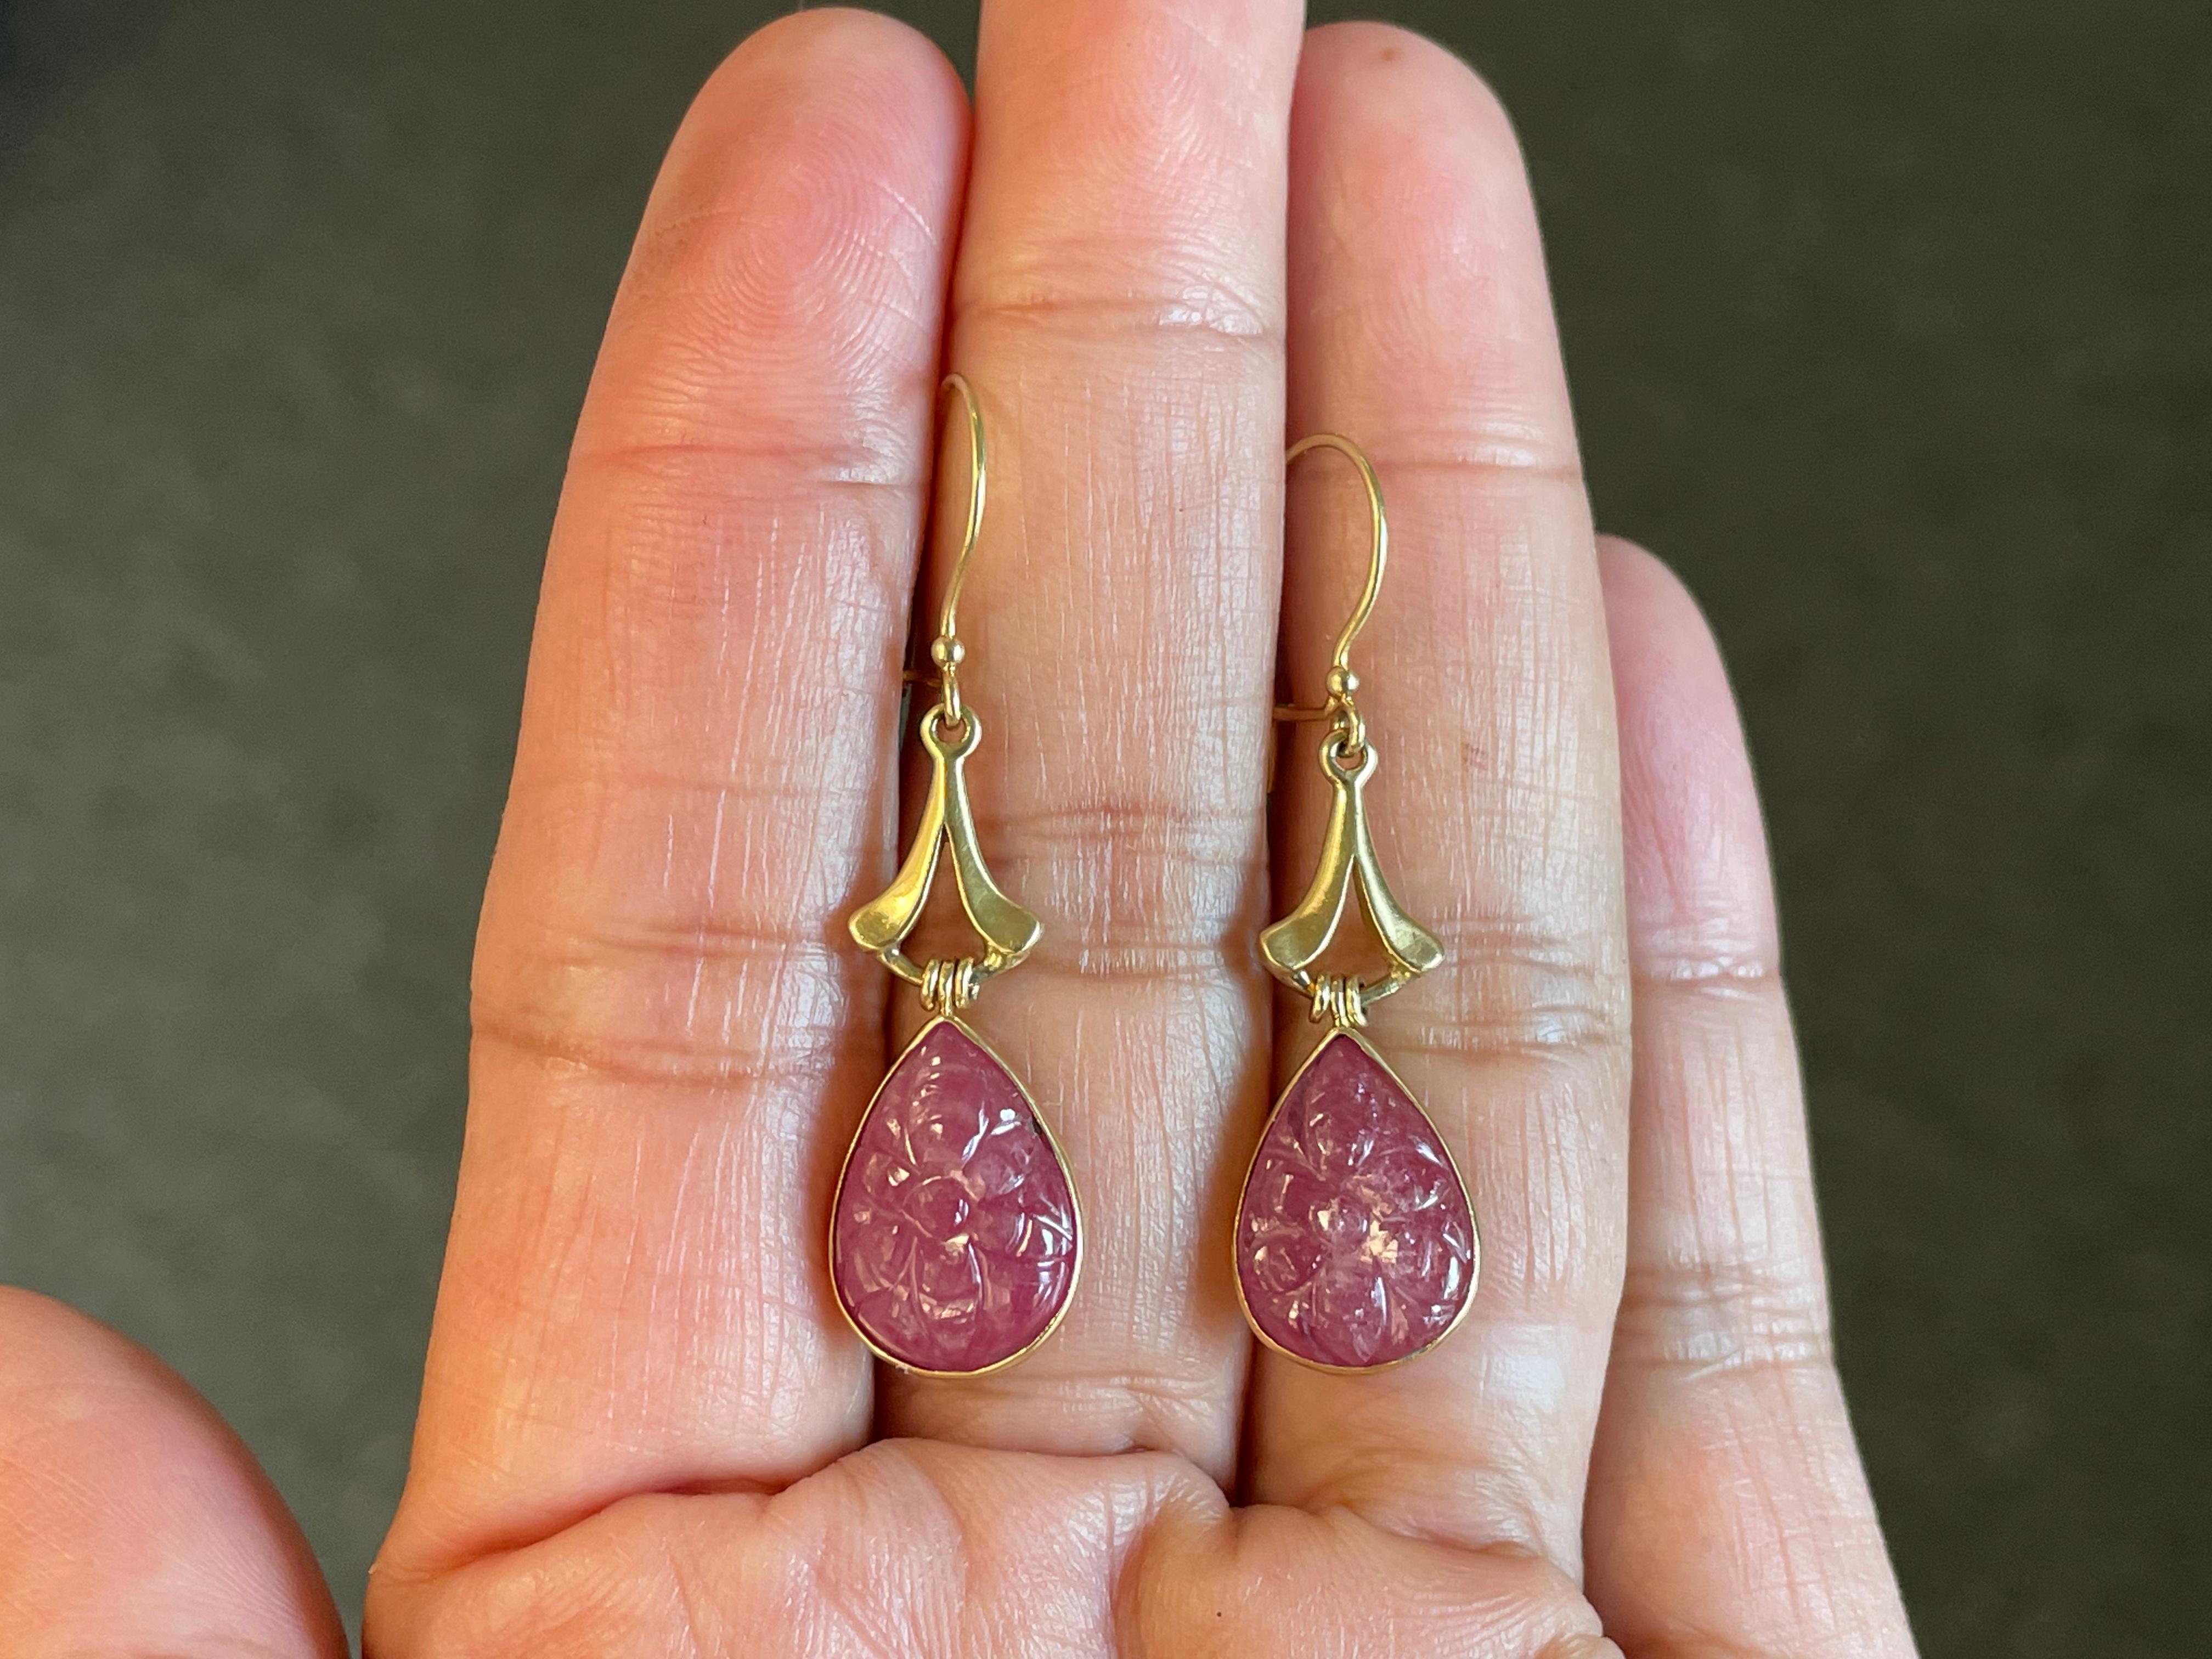 Two flower-pattern, pear shaped carved ruby cabochons approximately 10 x 14 mm dangle below a simple matte finish fluted component and safety clasp wires in this Steven Battelle design.
Simple and elegant.